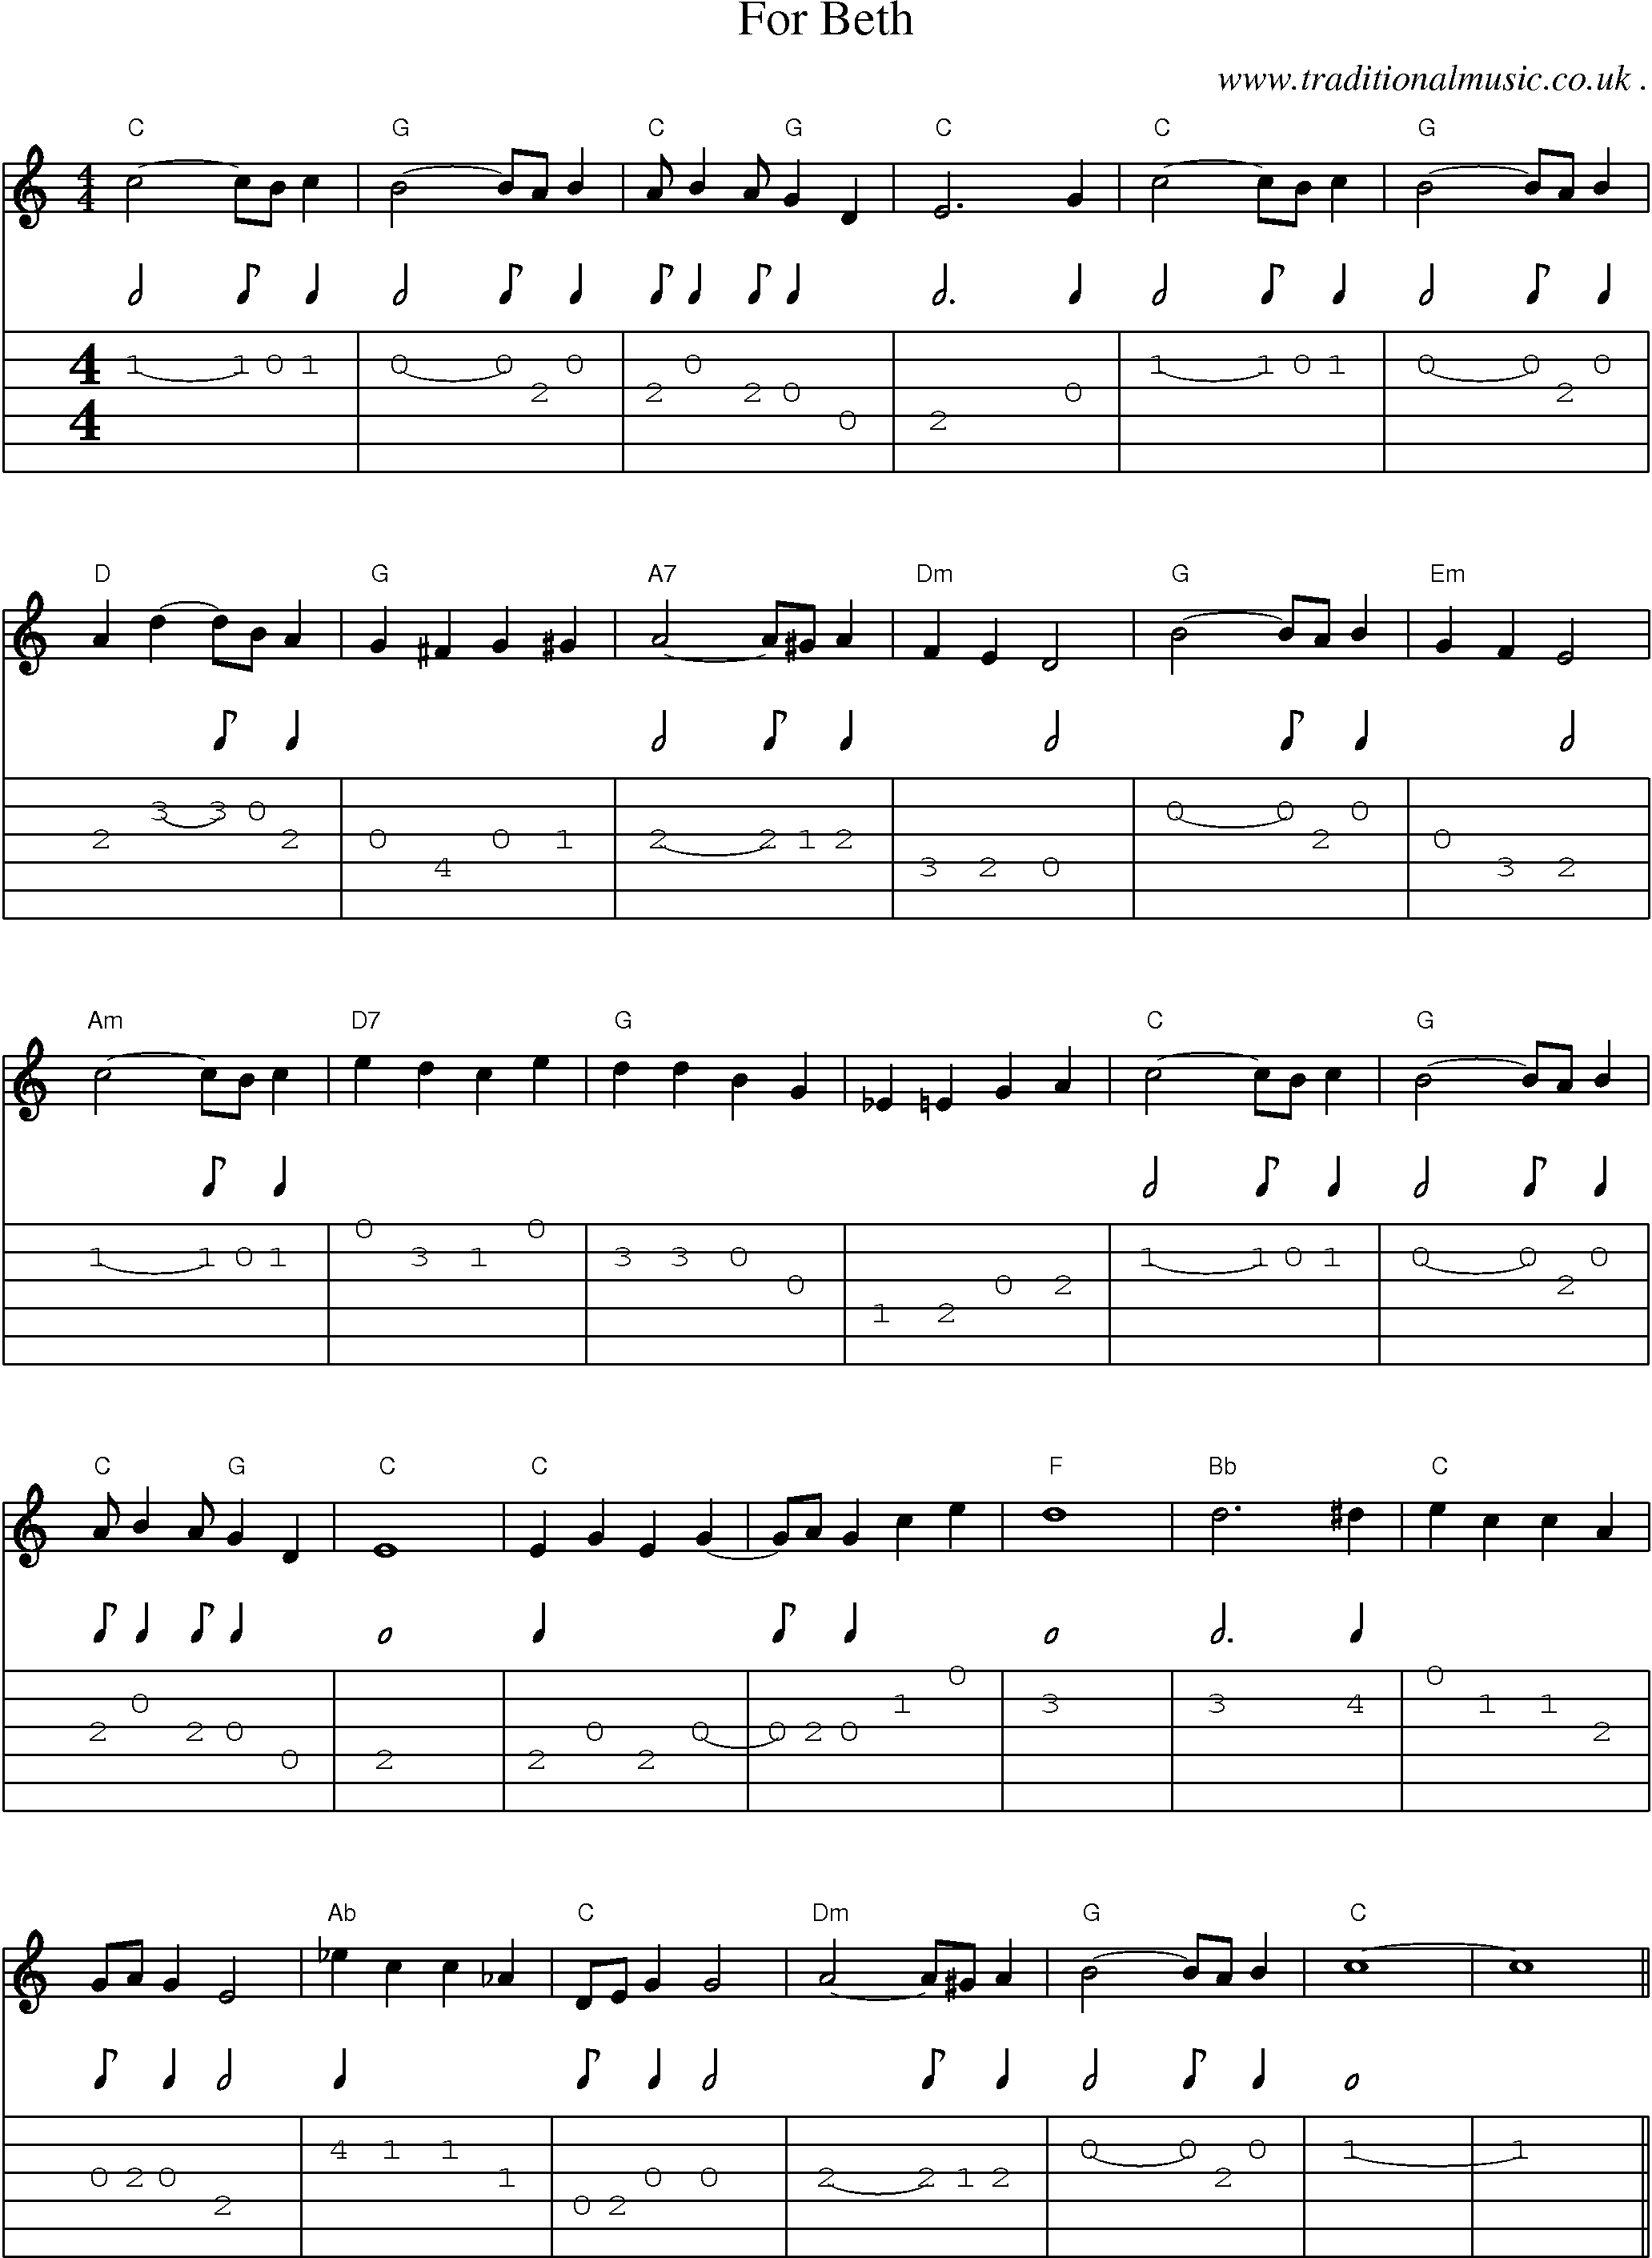 Sheet-Music and Guitar Tabs for For Beth